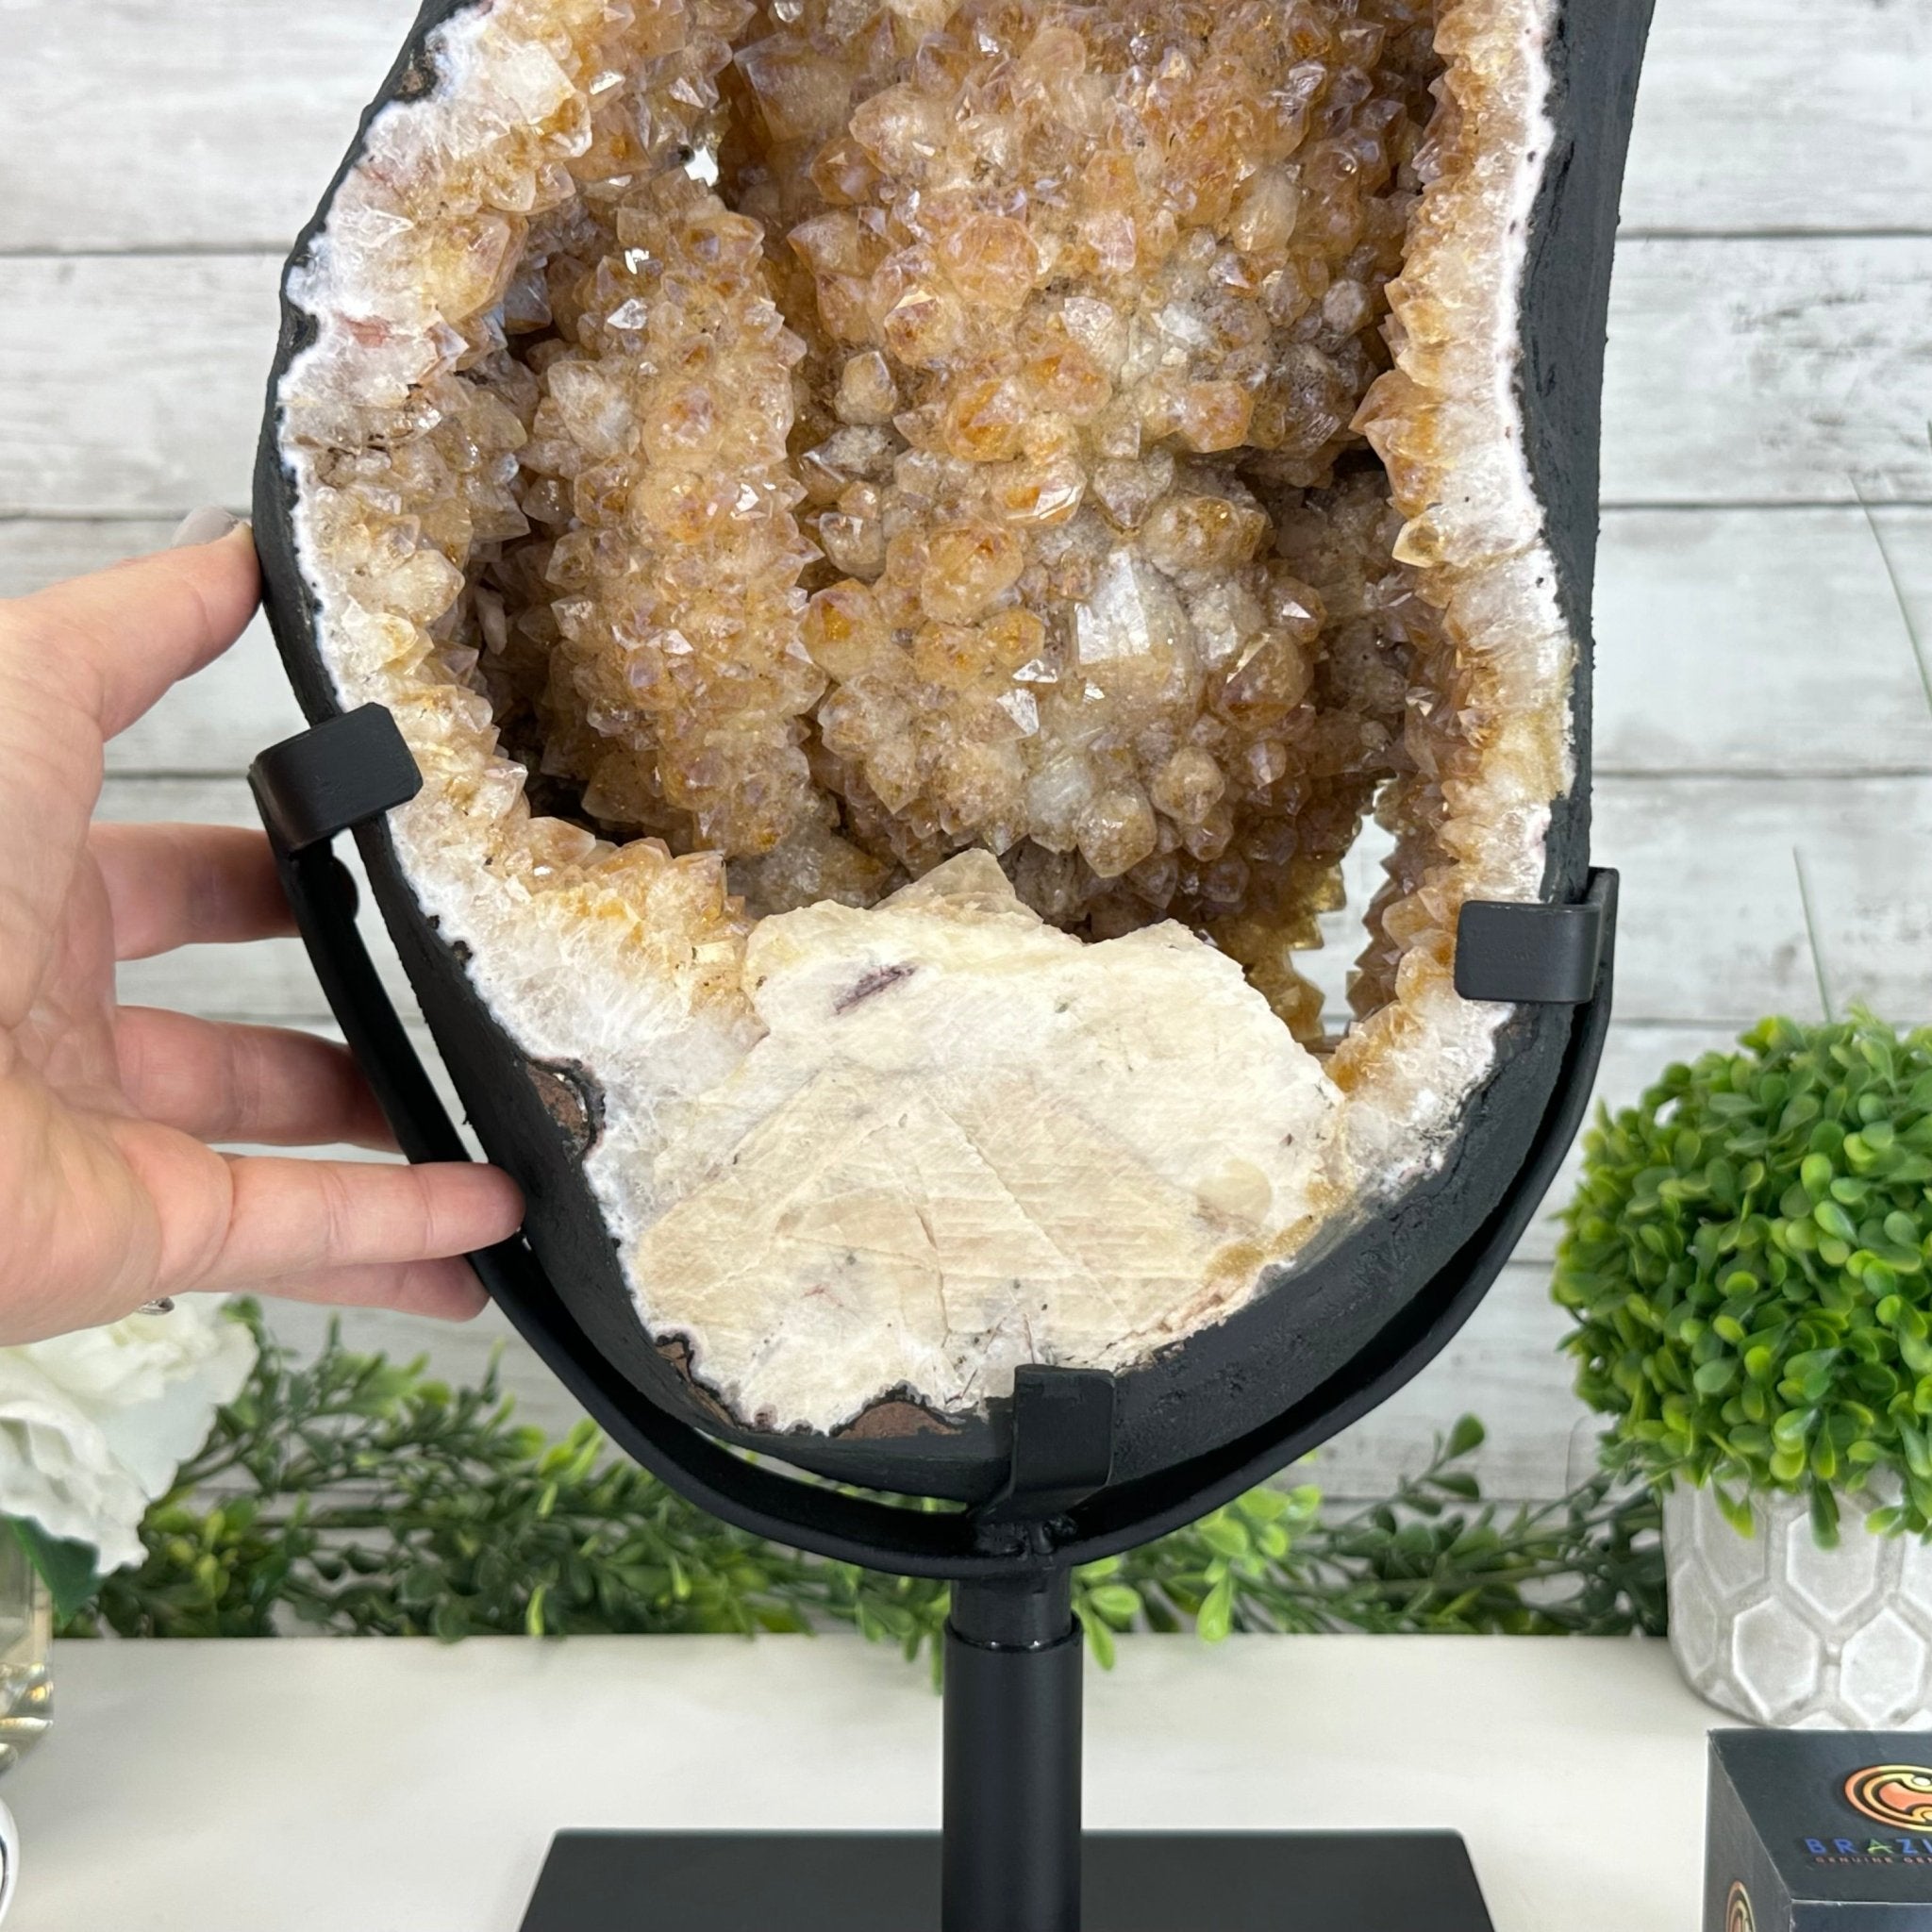 Citrine Portal on a Rotating Stand, 29 lbs & 20.3" tall #5625-0009 by Brazil Gems® - Brazil GemsBrazil GemsCitrine Portal on a Rotating Stand, 29 lbs & 20.3" tall #5625-0009 by Brazil Gems®Portals on Rotating Bases5625-0009